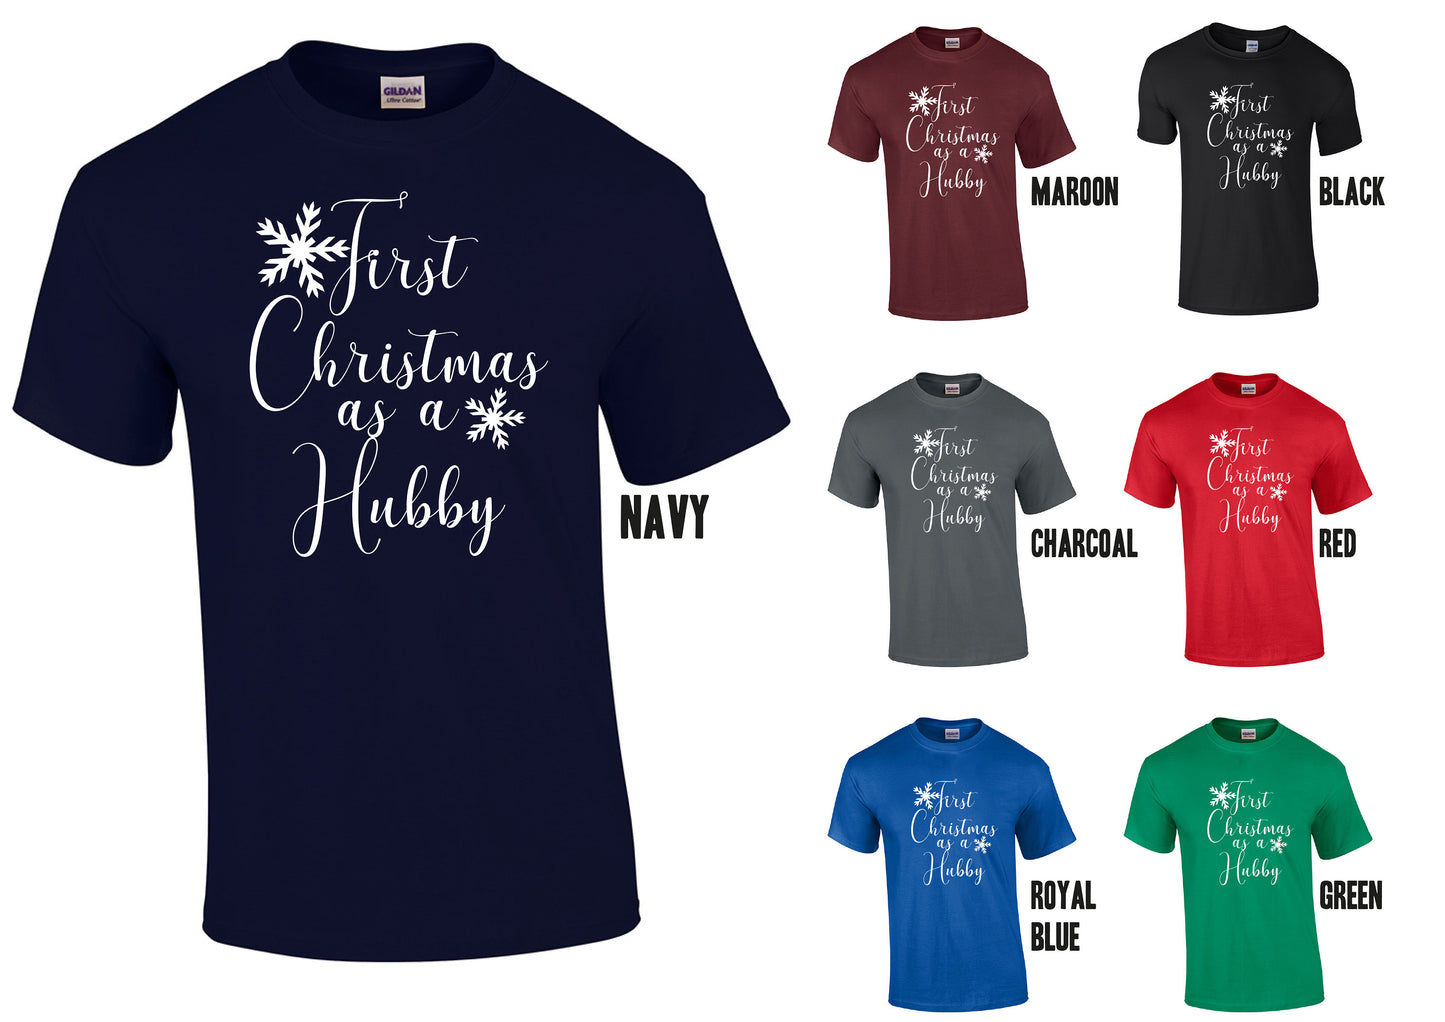 First Christmas as a Hubby T-Shirt - Cool, Funny Xmas Gift